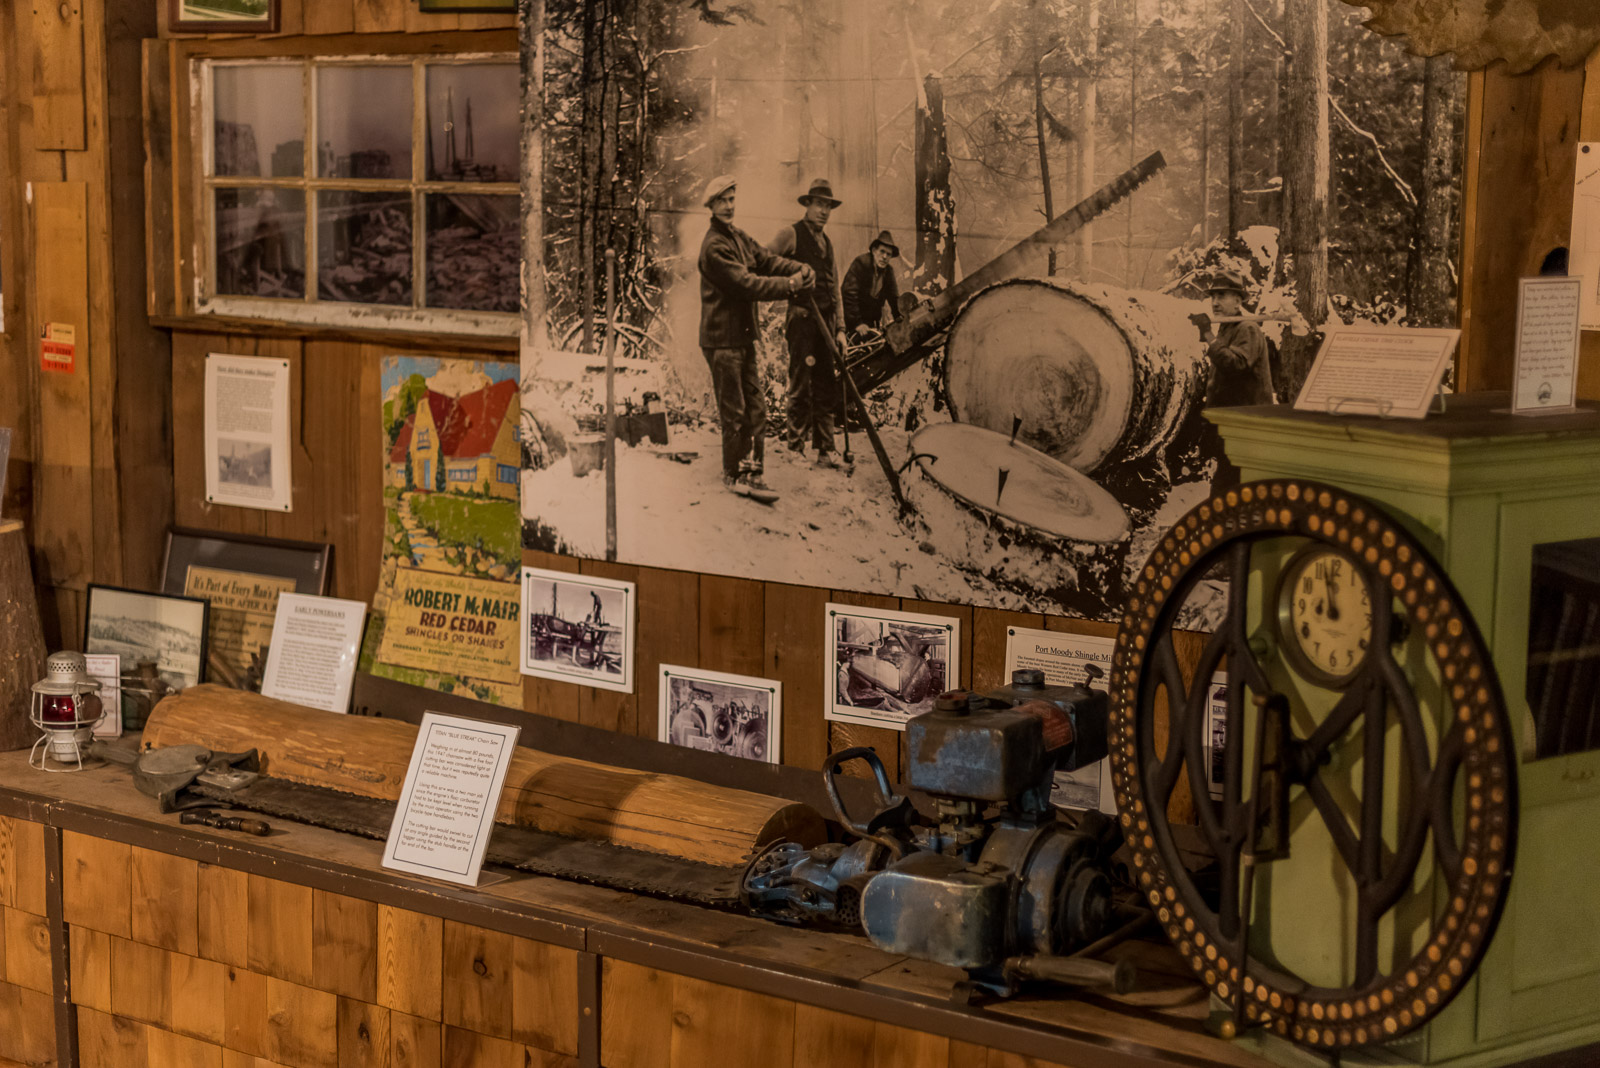 Display dedicated to the lumber industry in the area